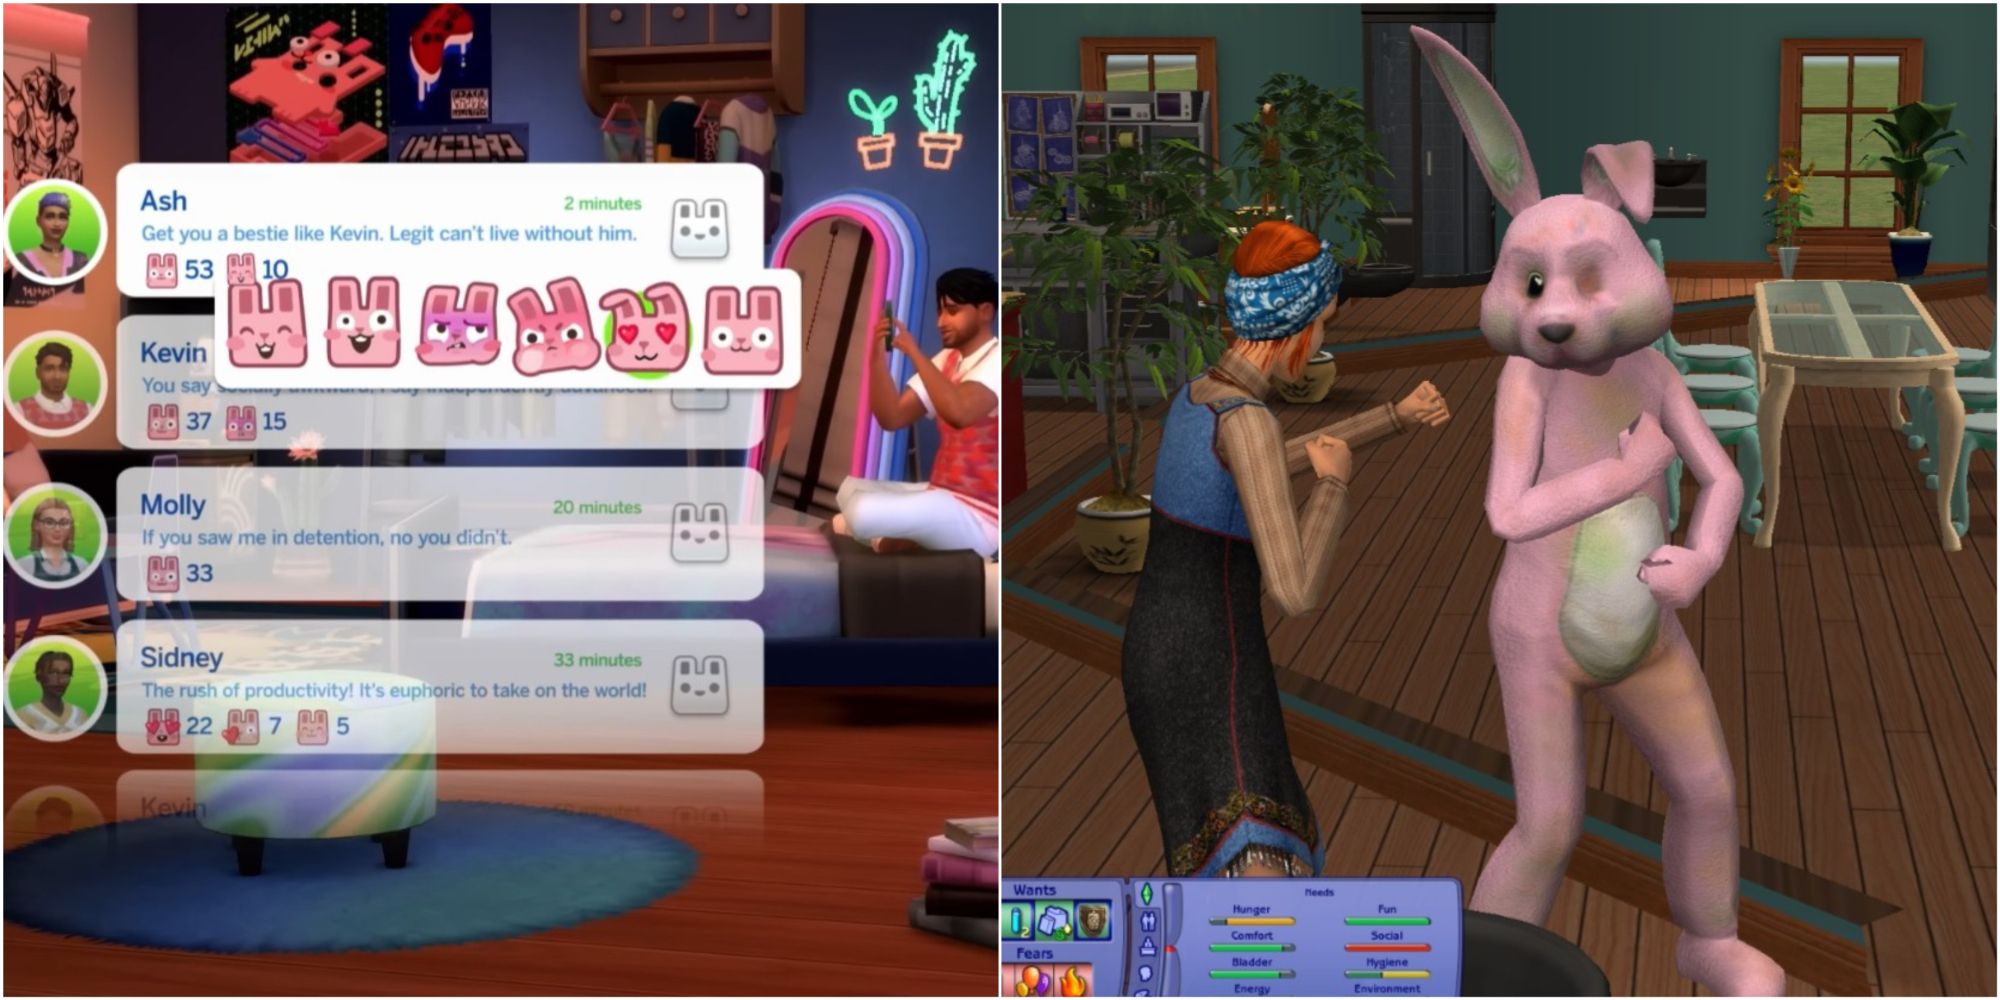 Social Bunny App in The Sims 4 and NPC in The Sims 2